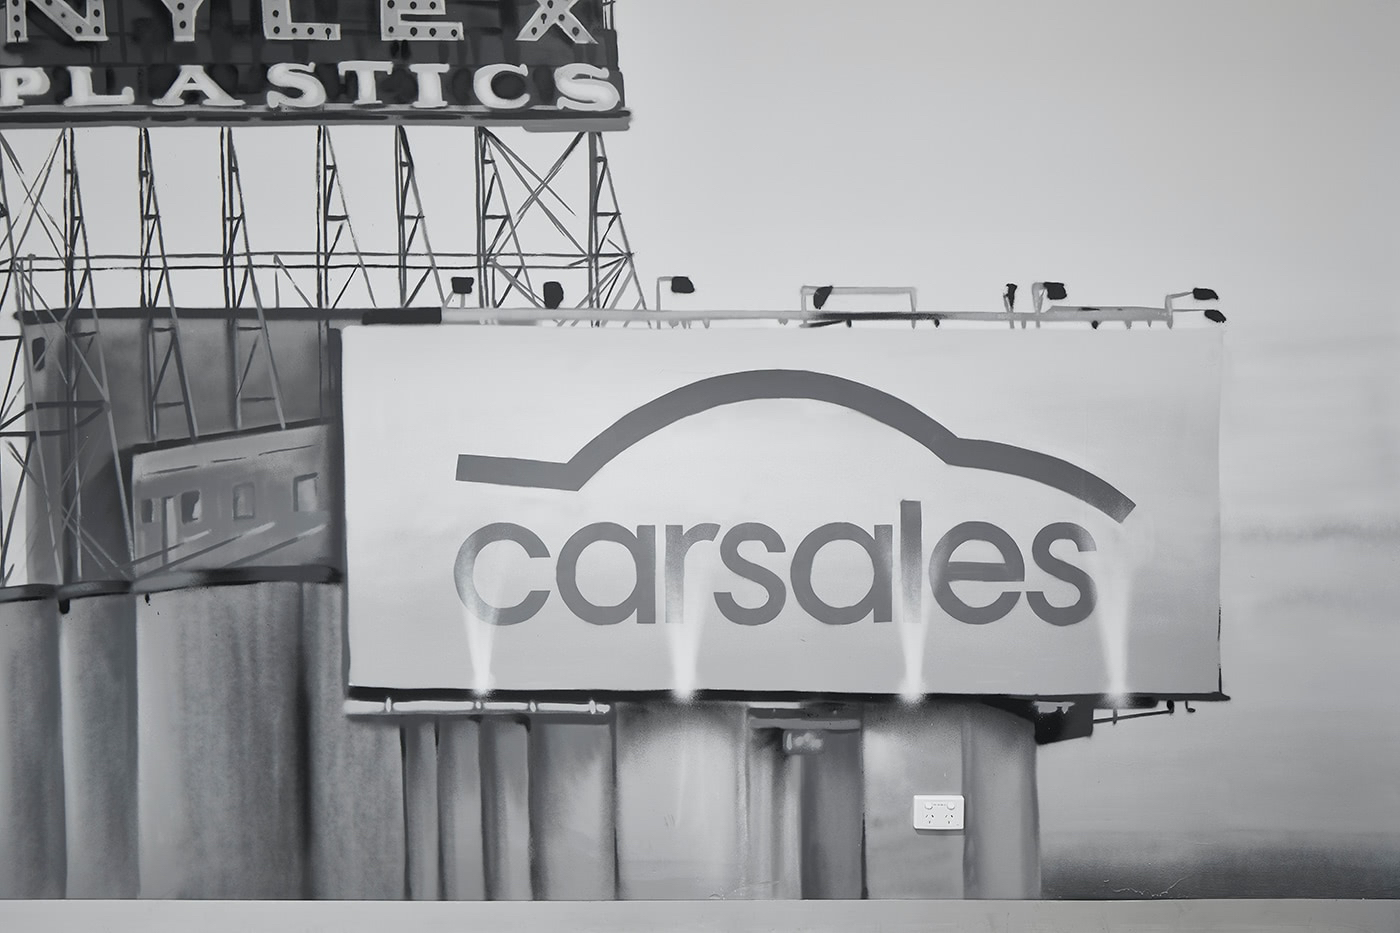 Carsales signage